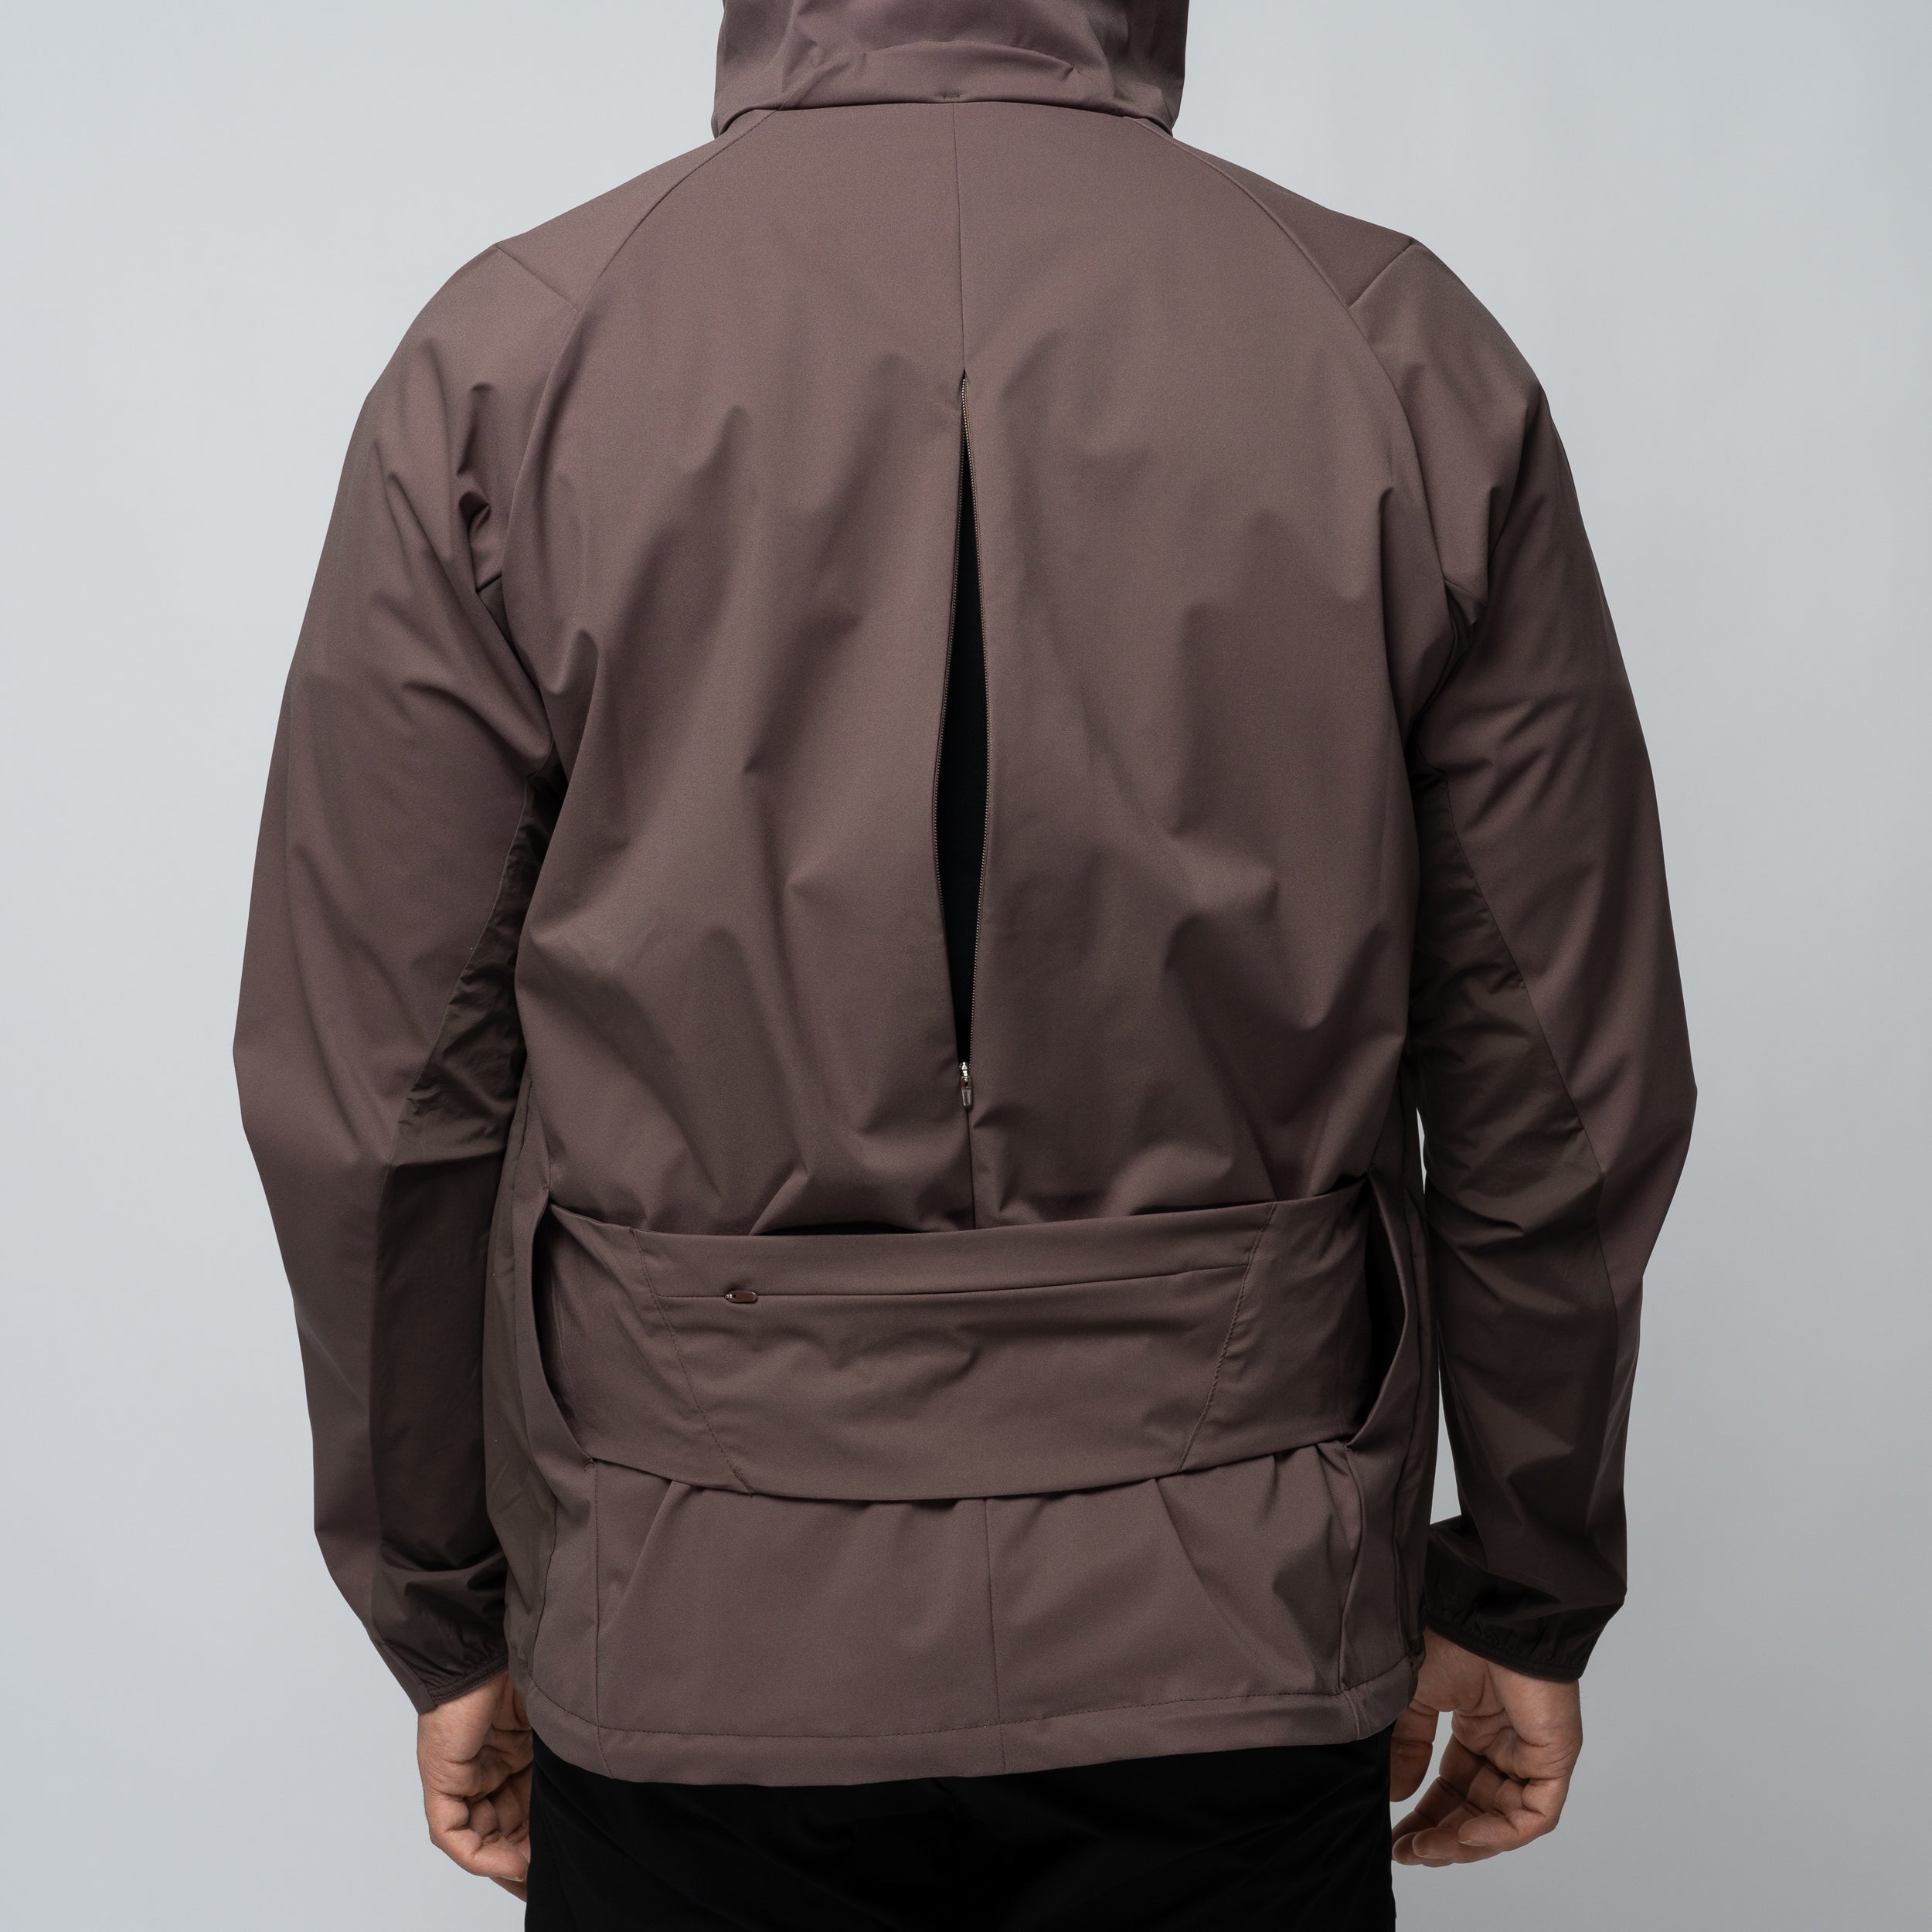 PAF 6.0 Technical Jacket Right Brown 60OTRBR